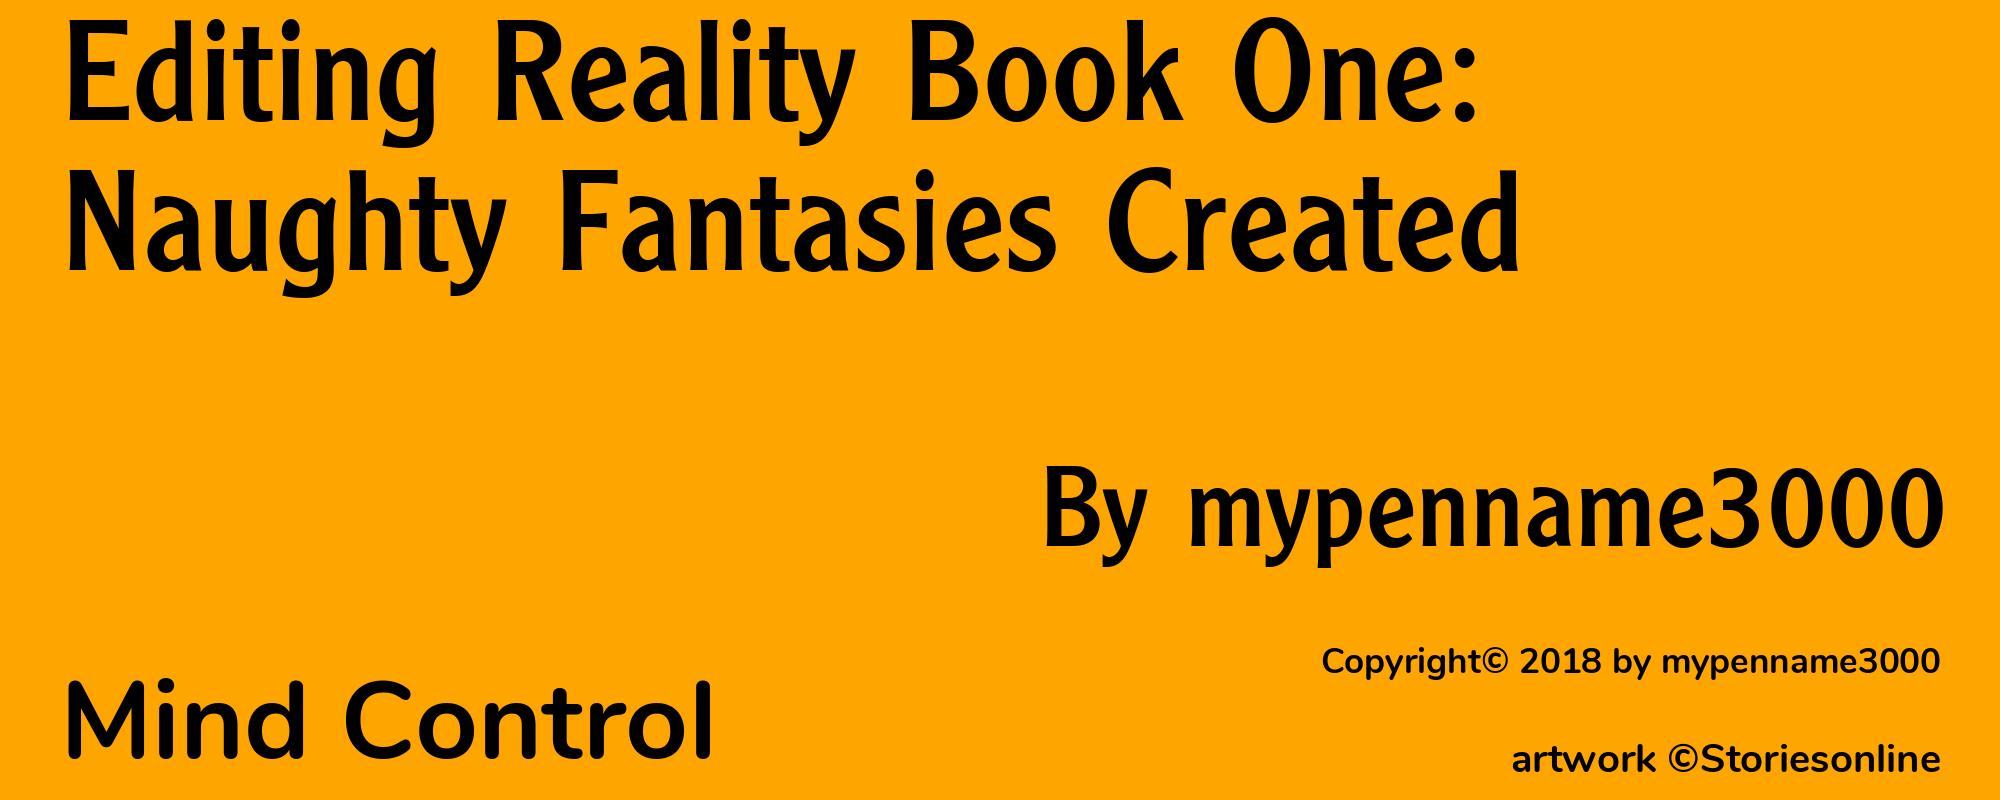 Editing Reality Book One: Naughty Fantasies Created - Cover